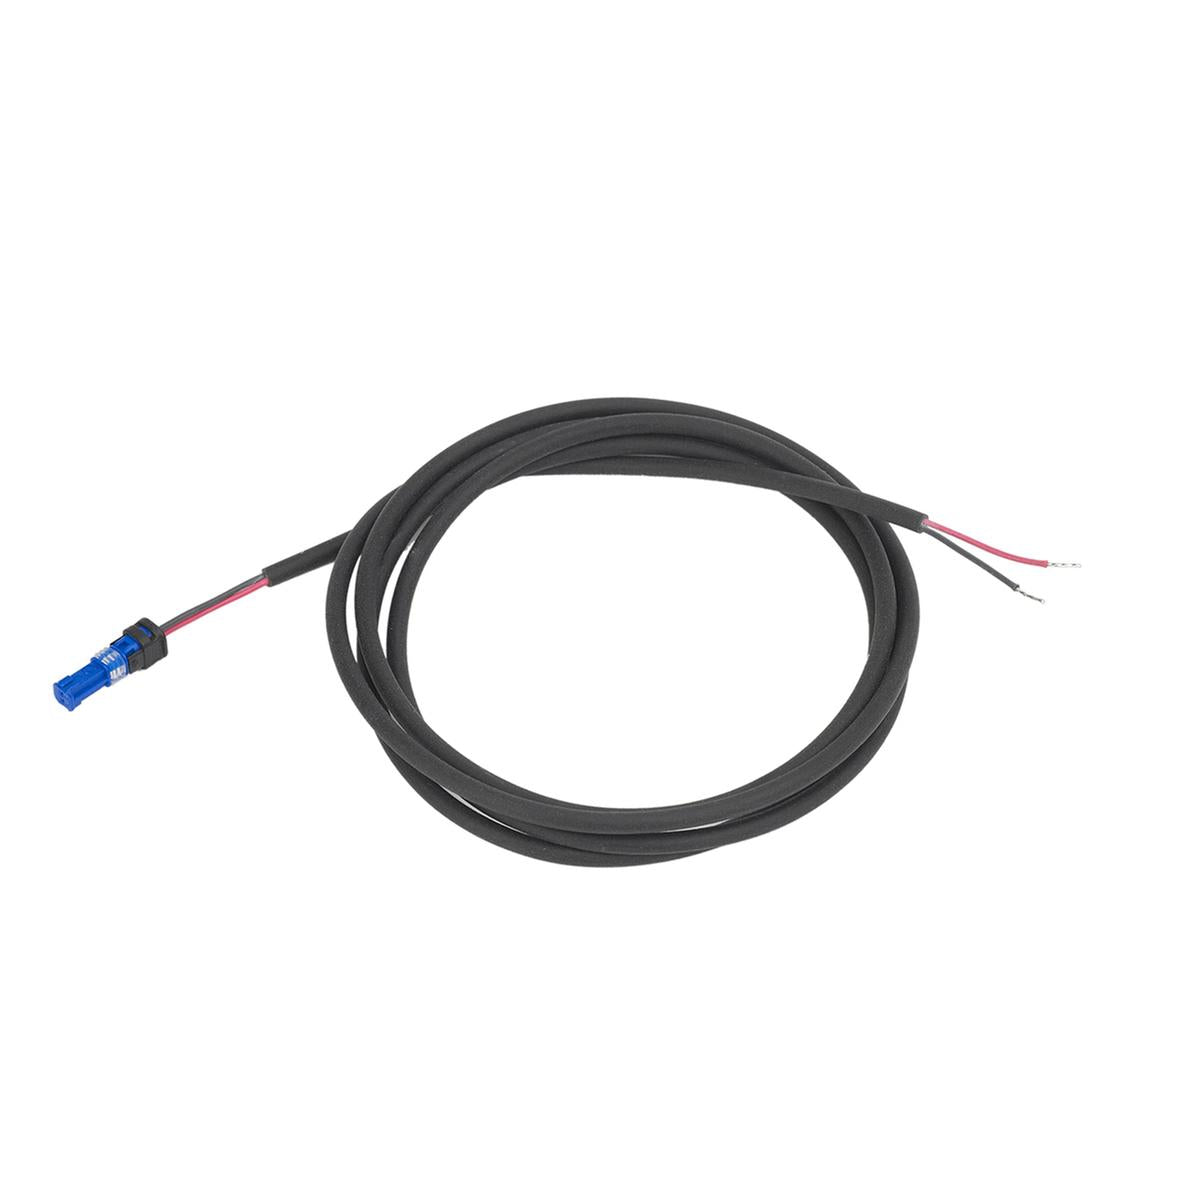 Bosch Light Cable for Headlight 1.4m